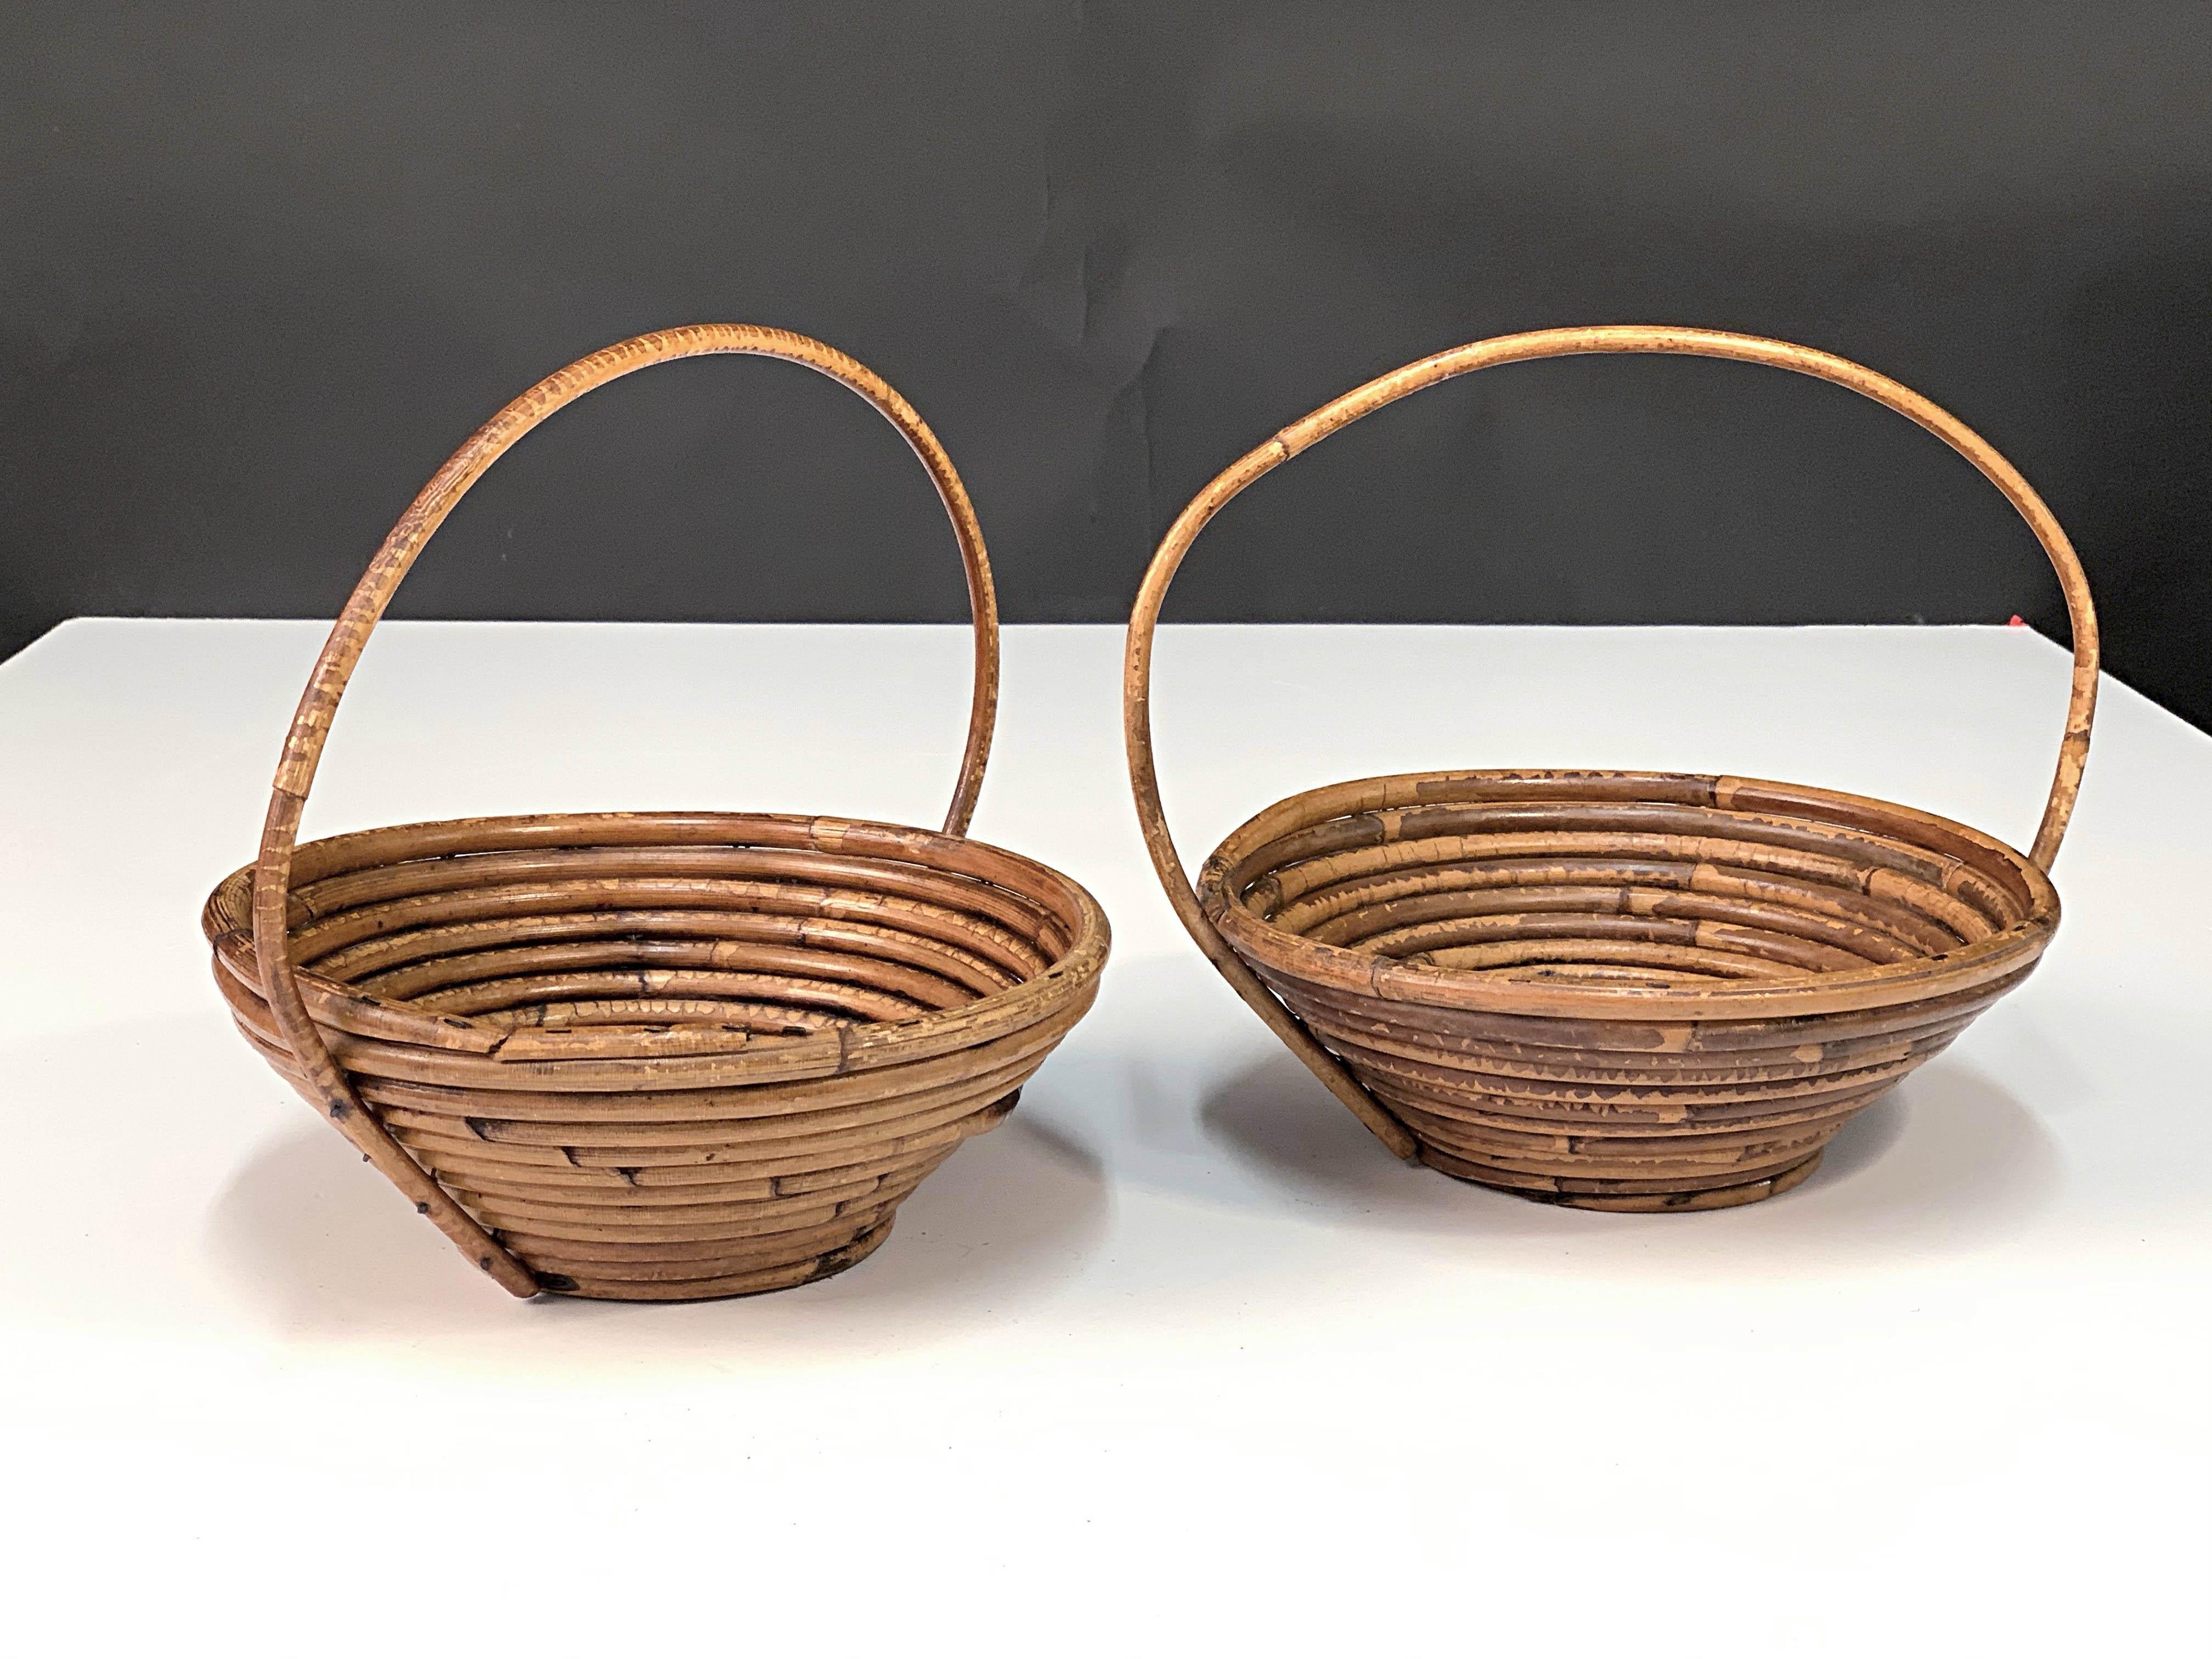 Pair of fantastic Mid-Century Modern decorative rattan and bamboo decorative bowls.

These pieces were produced in Italy during the 70s, deeply inspired by the naturist. 

These items can be used as bowls, centrepieces or decorative baskets,